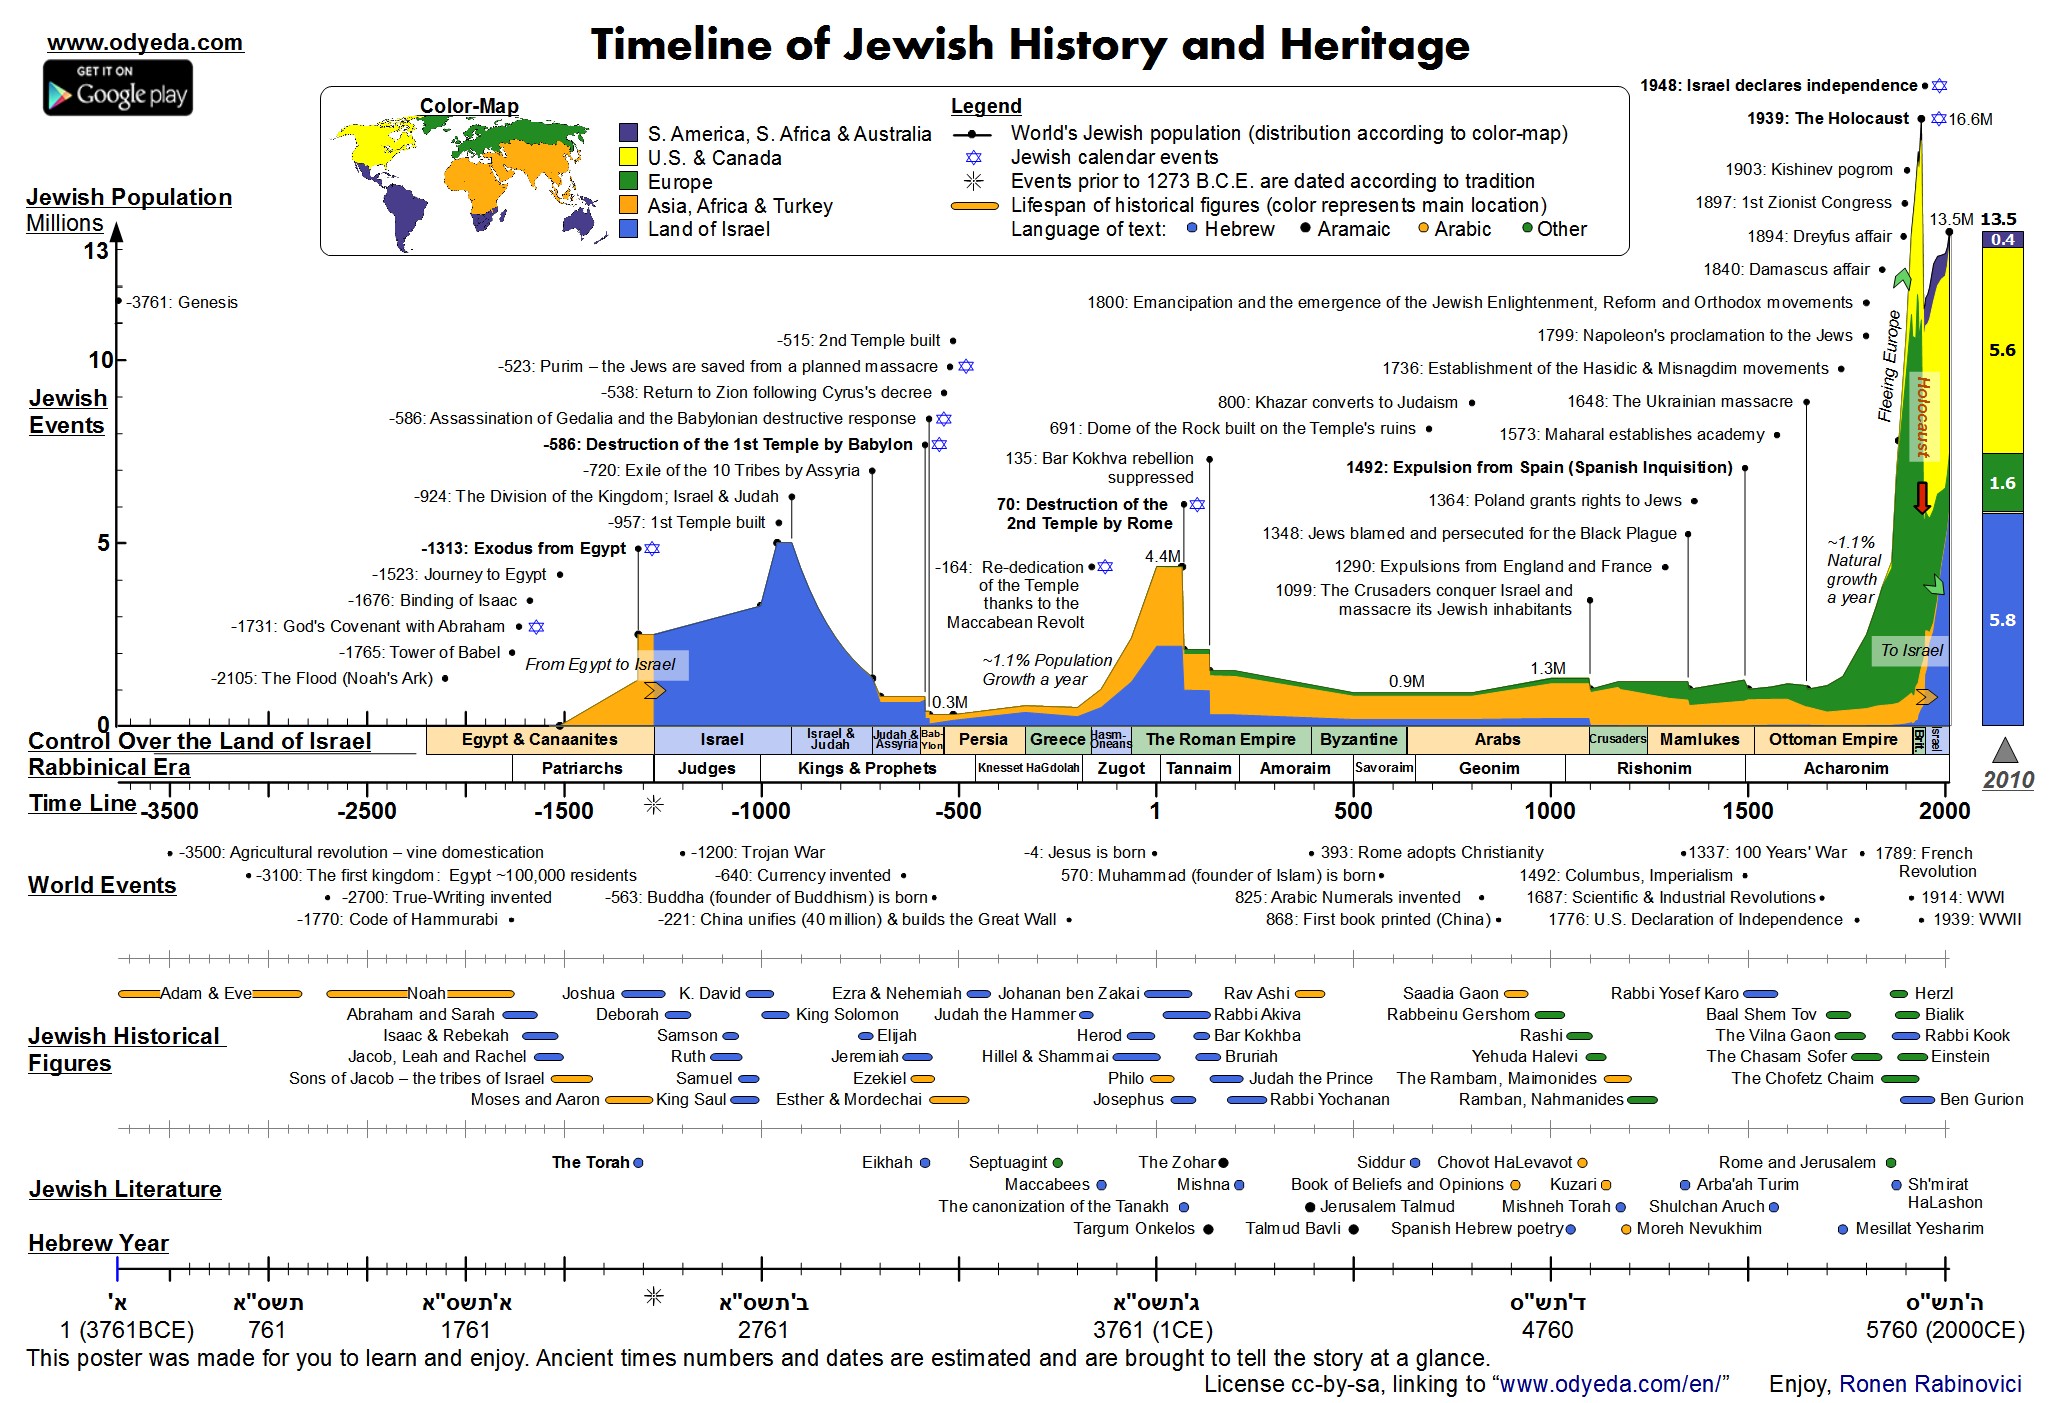 Timeline of Jewish History and Heritage